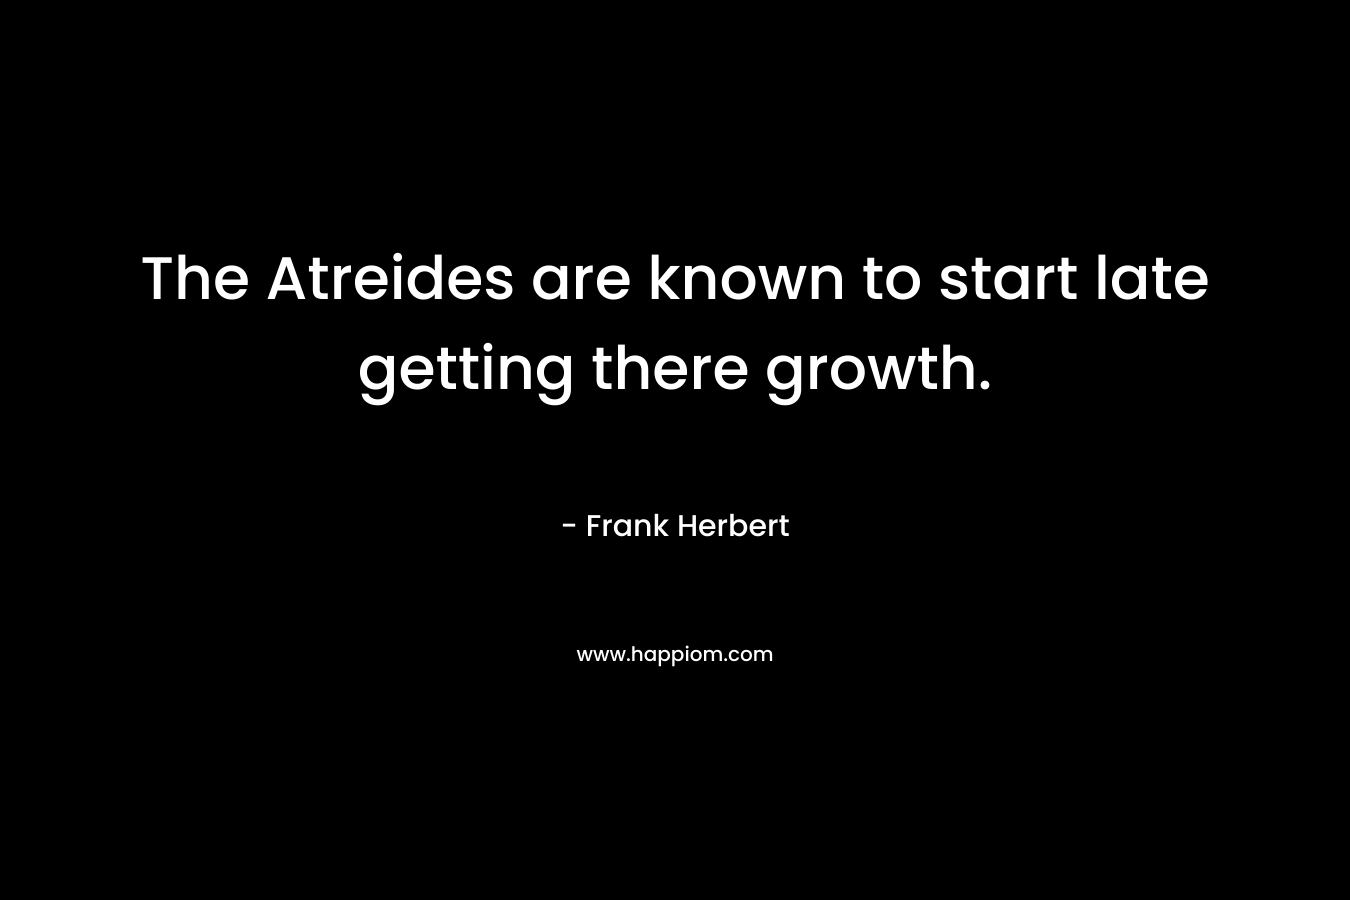 The Atreides are known to start late getting there growth.